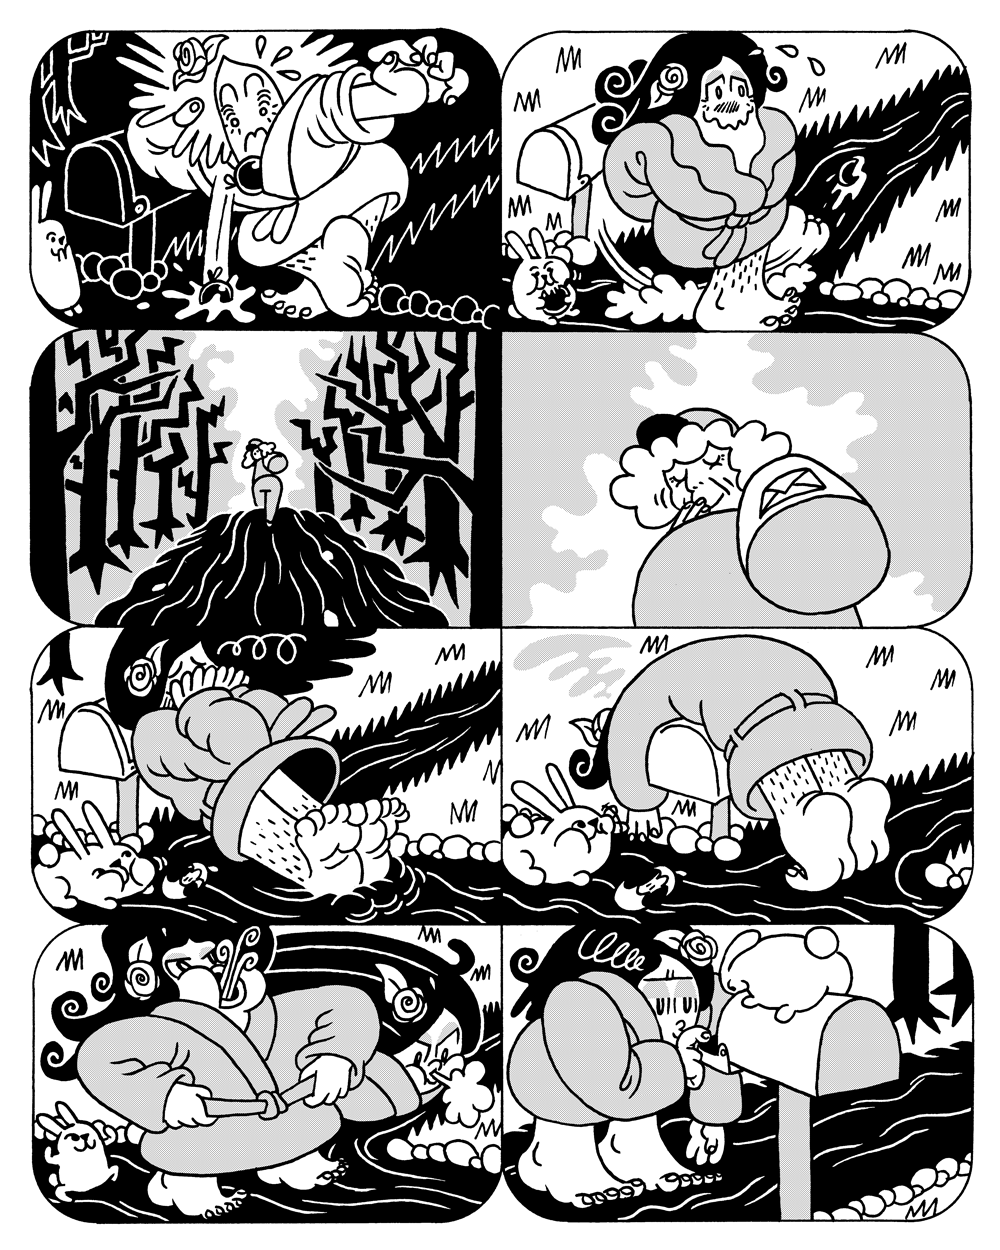 She's Done it All! Part 5 Page 2 by Benjamin Urkowitz by Hazlitt